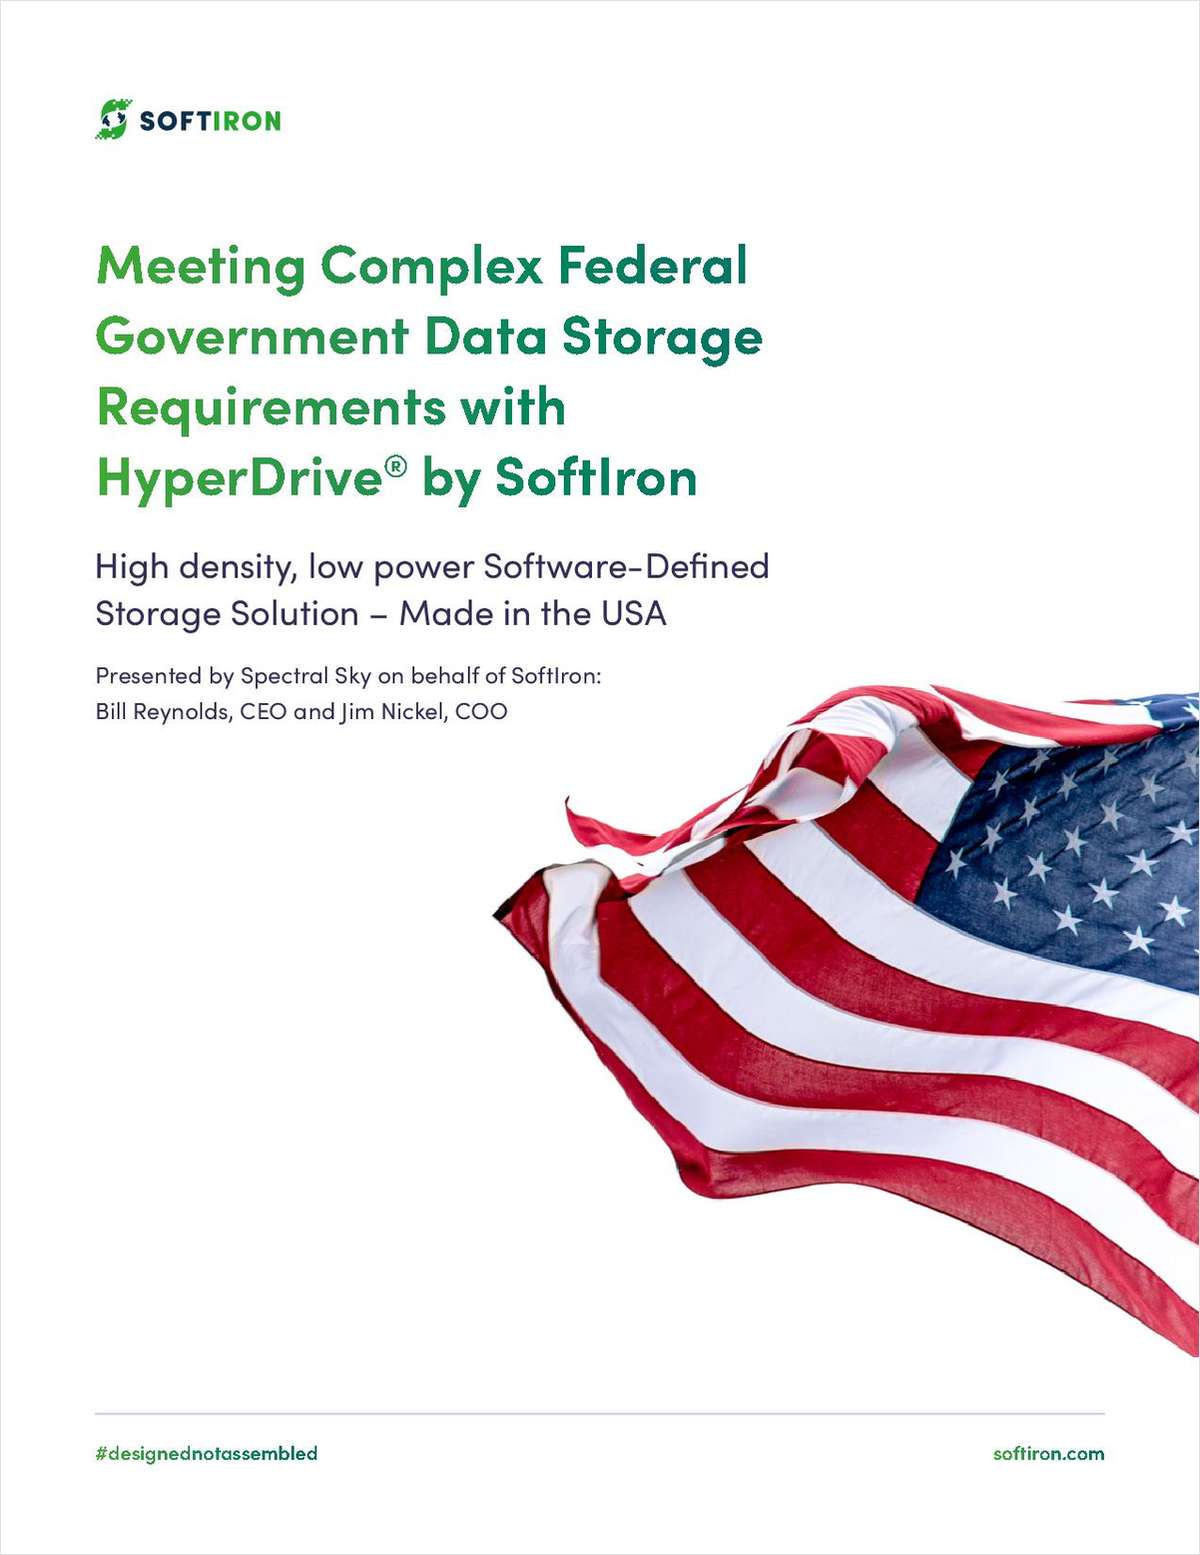 Meeting Complex Federal Government Data Storage Requirements with HyperDrive® by SoftIron